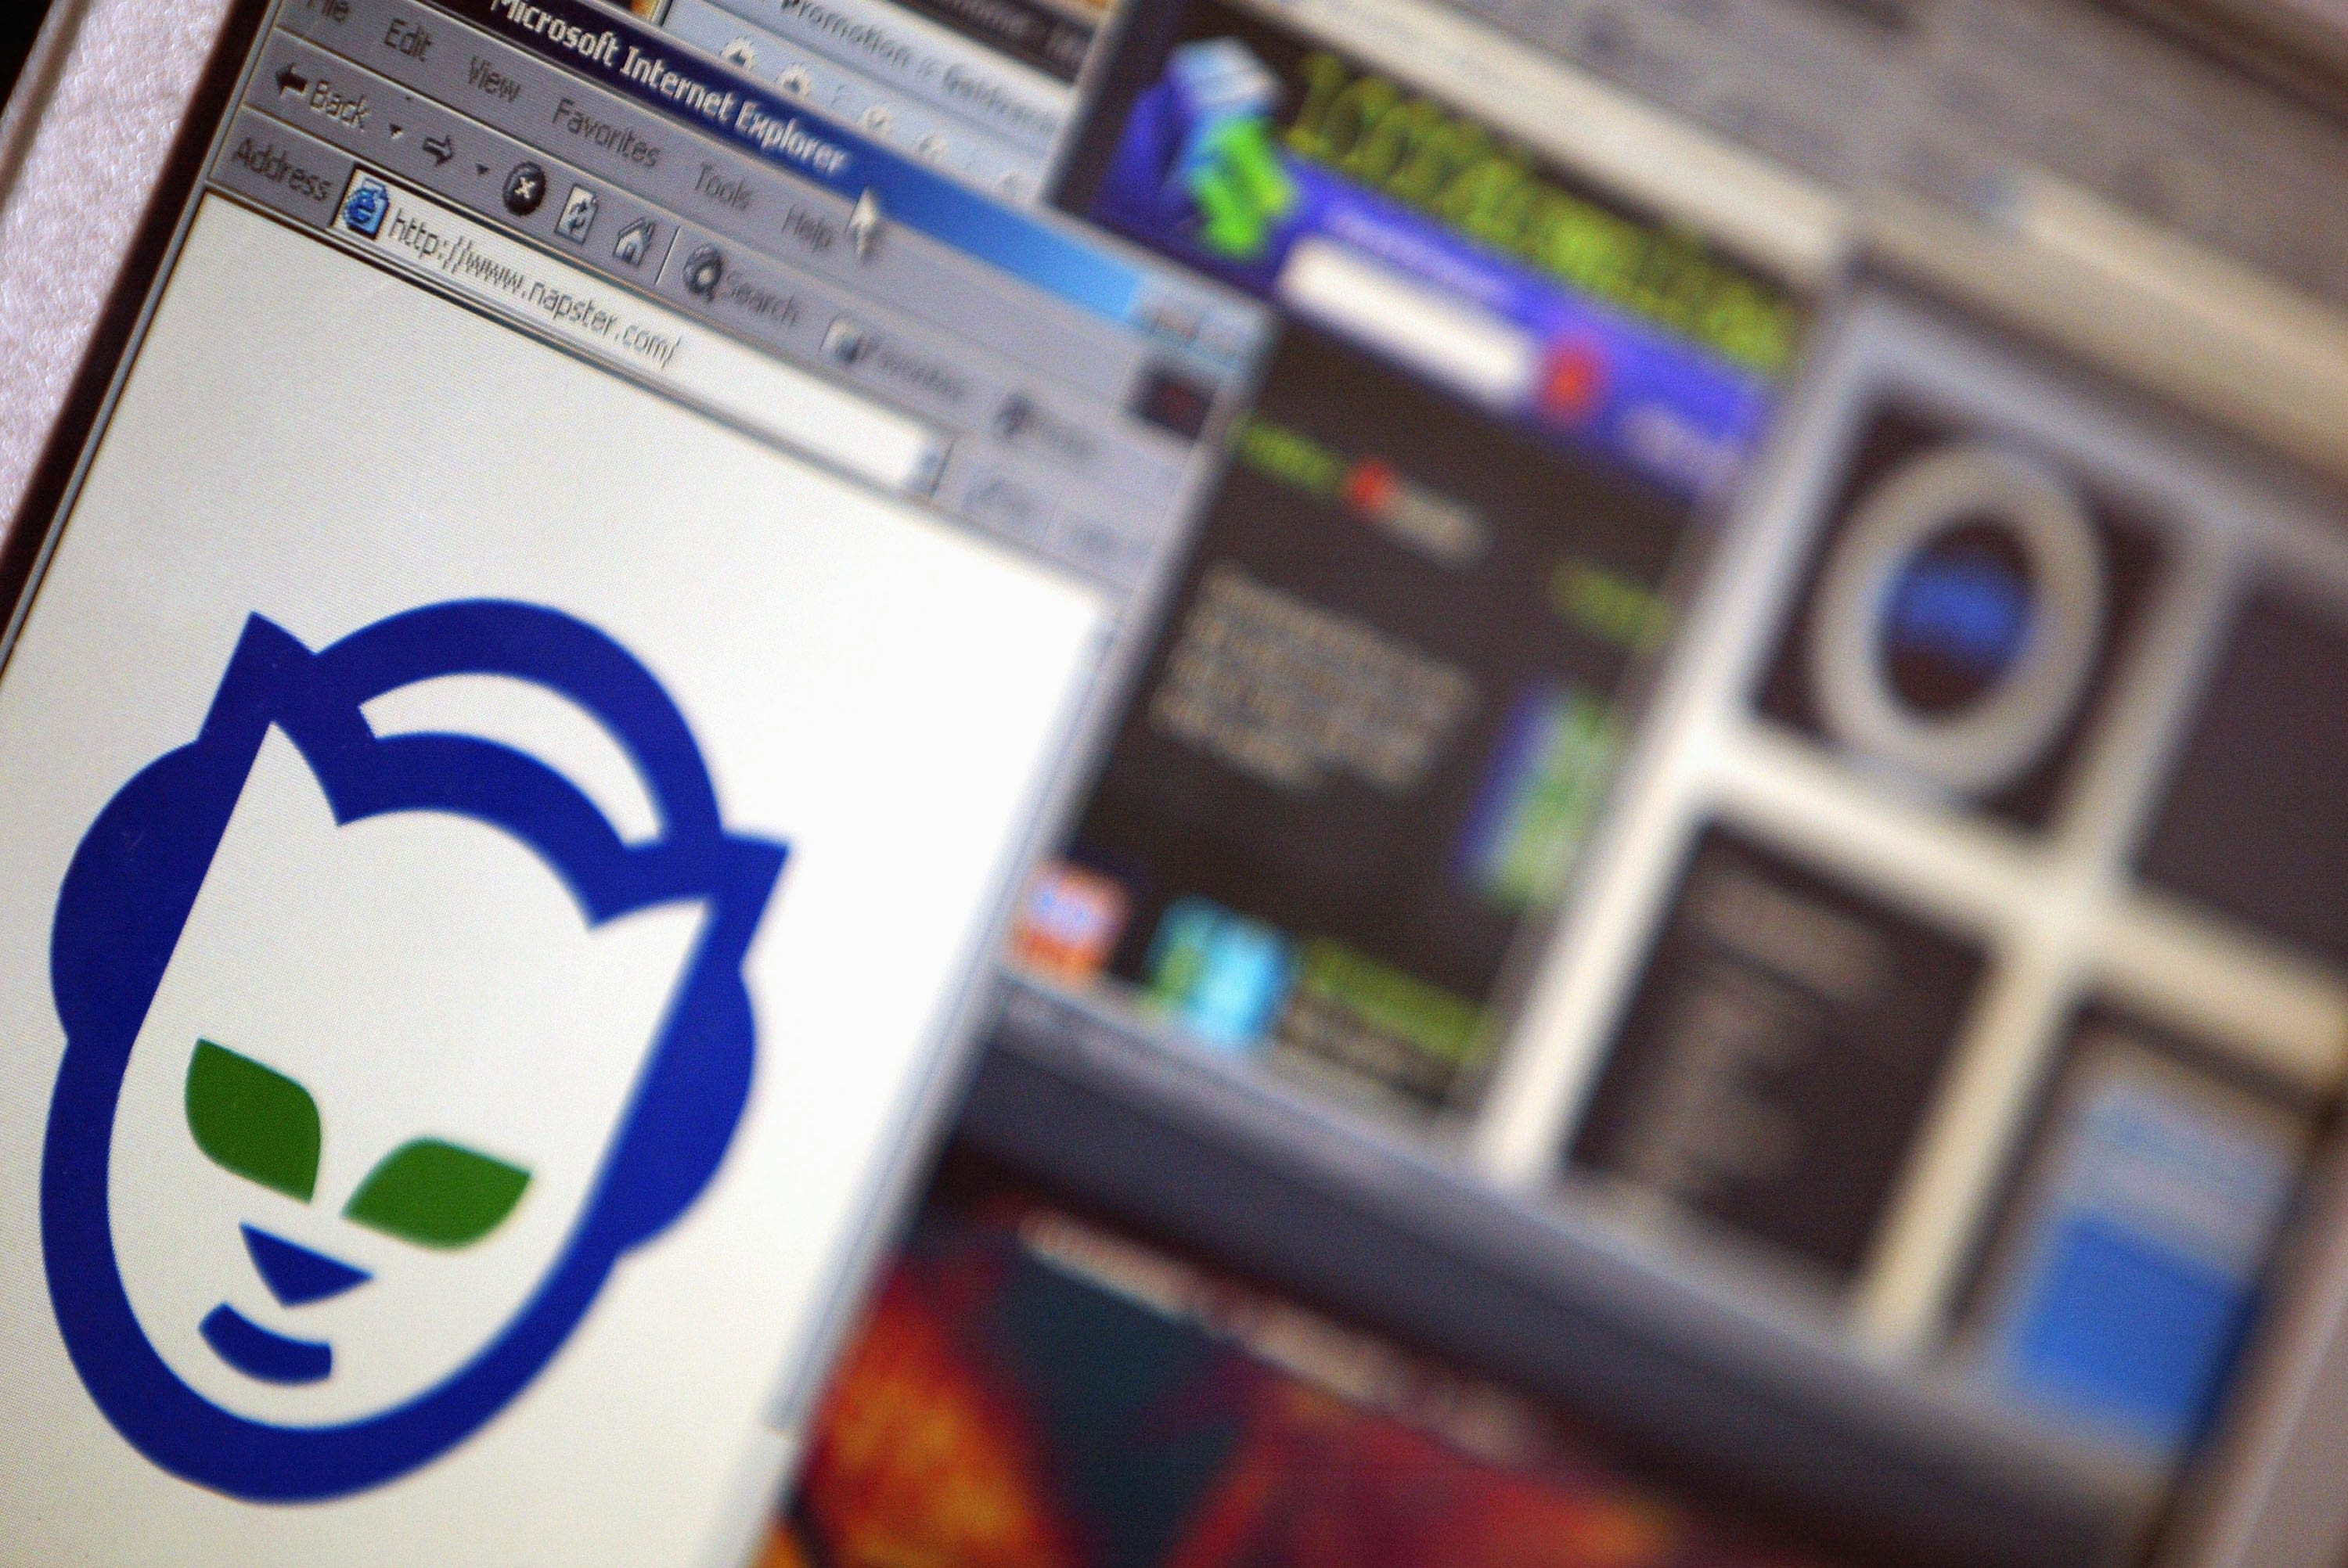 It’s been 25 years since Napster launched and changed the music industry forever